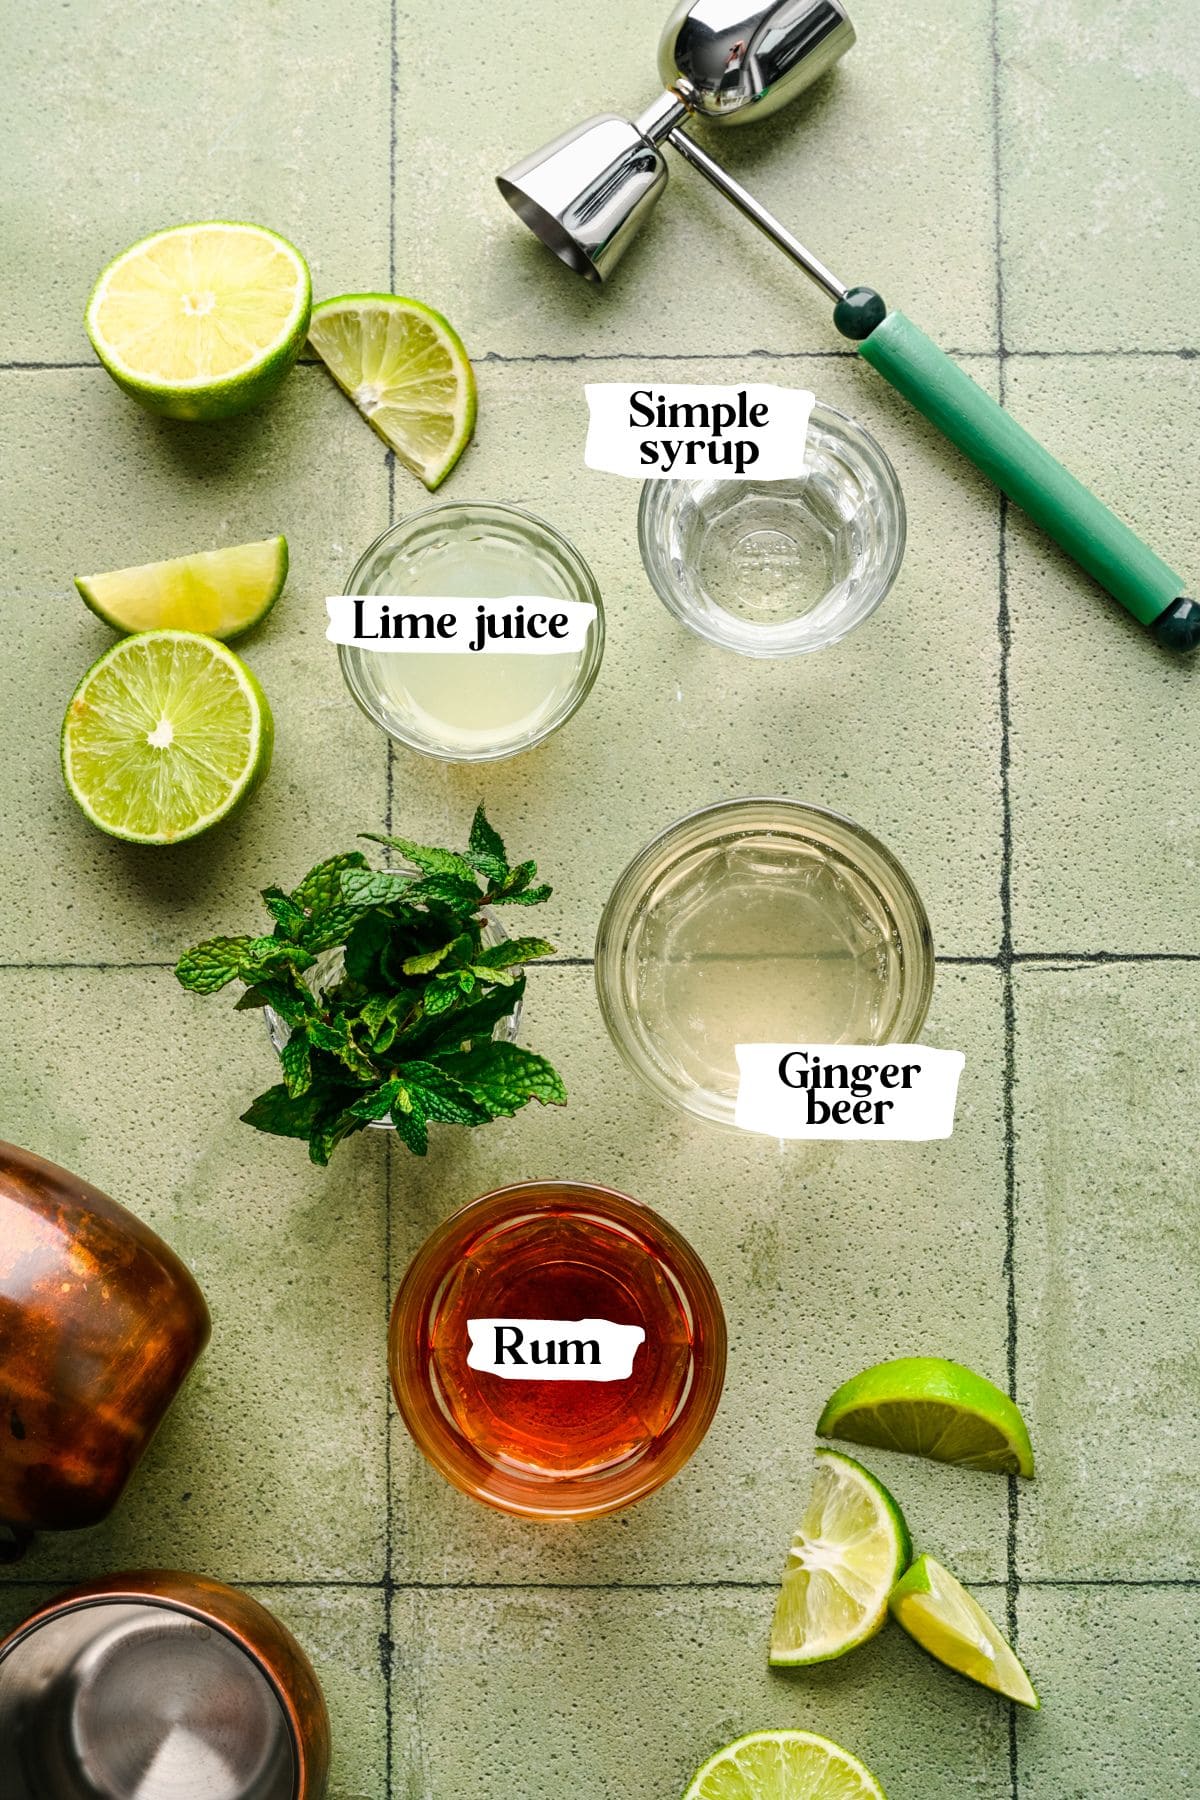 Rum Moscow Mule ingredients including lime juice and ginger beer.